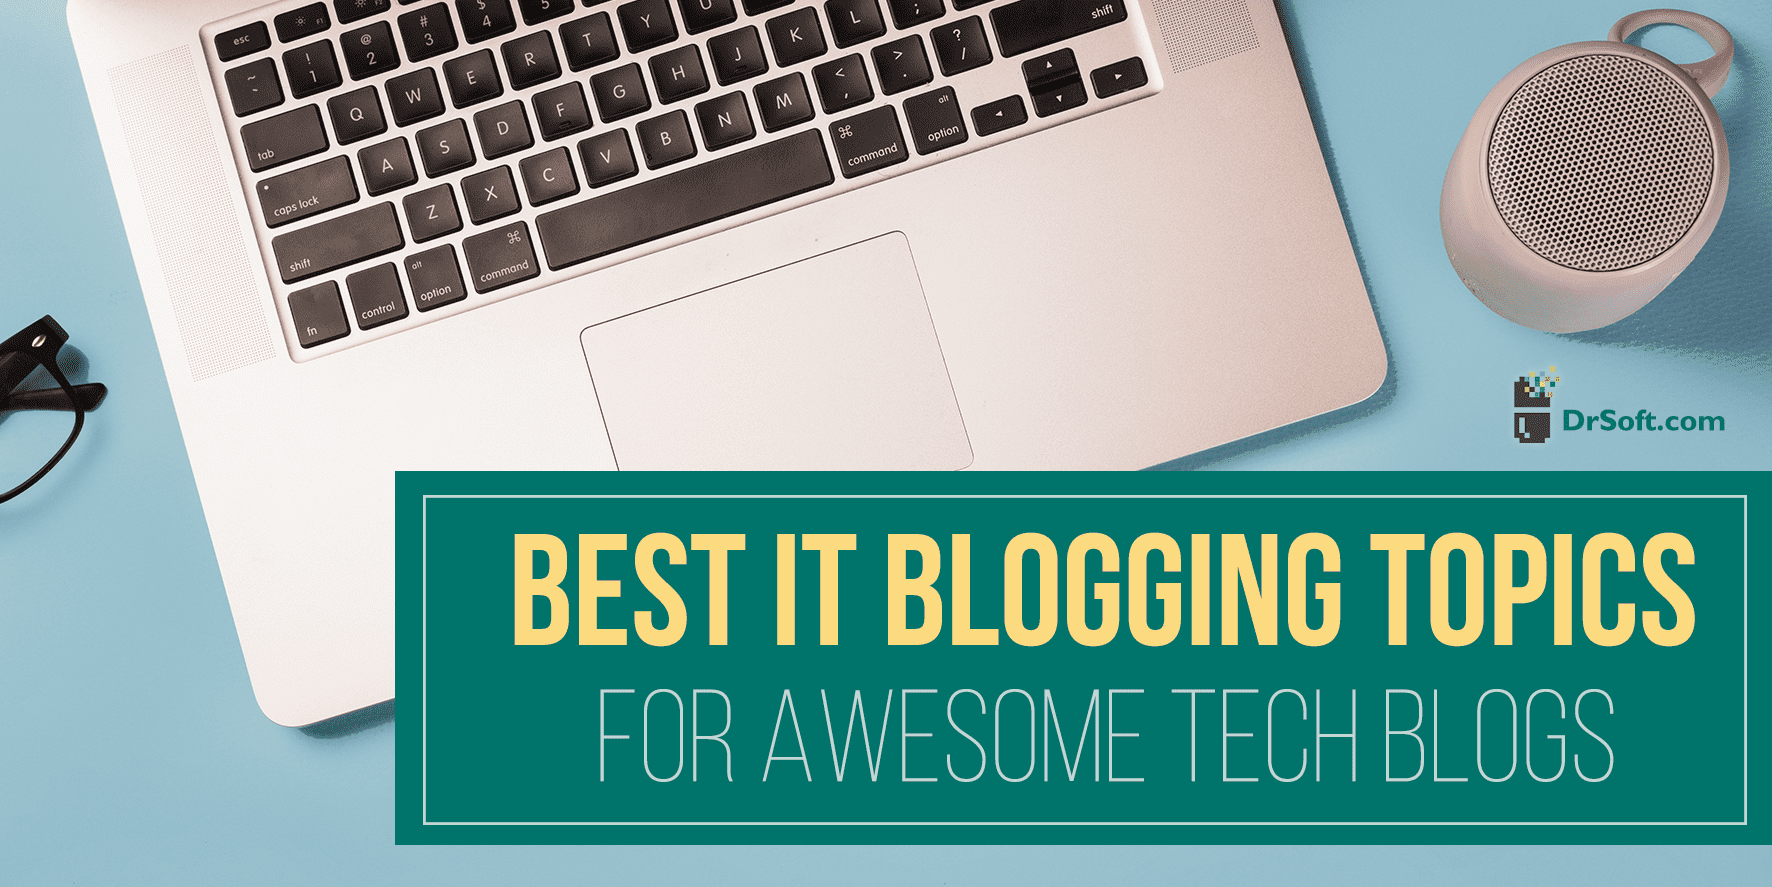 Best IT Blogging Topics for Awesome Tech Blogs